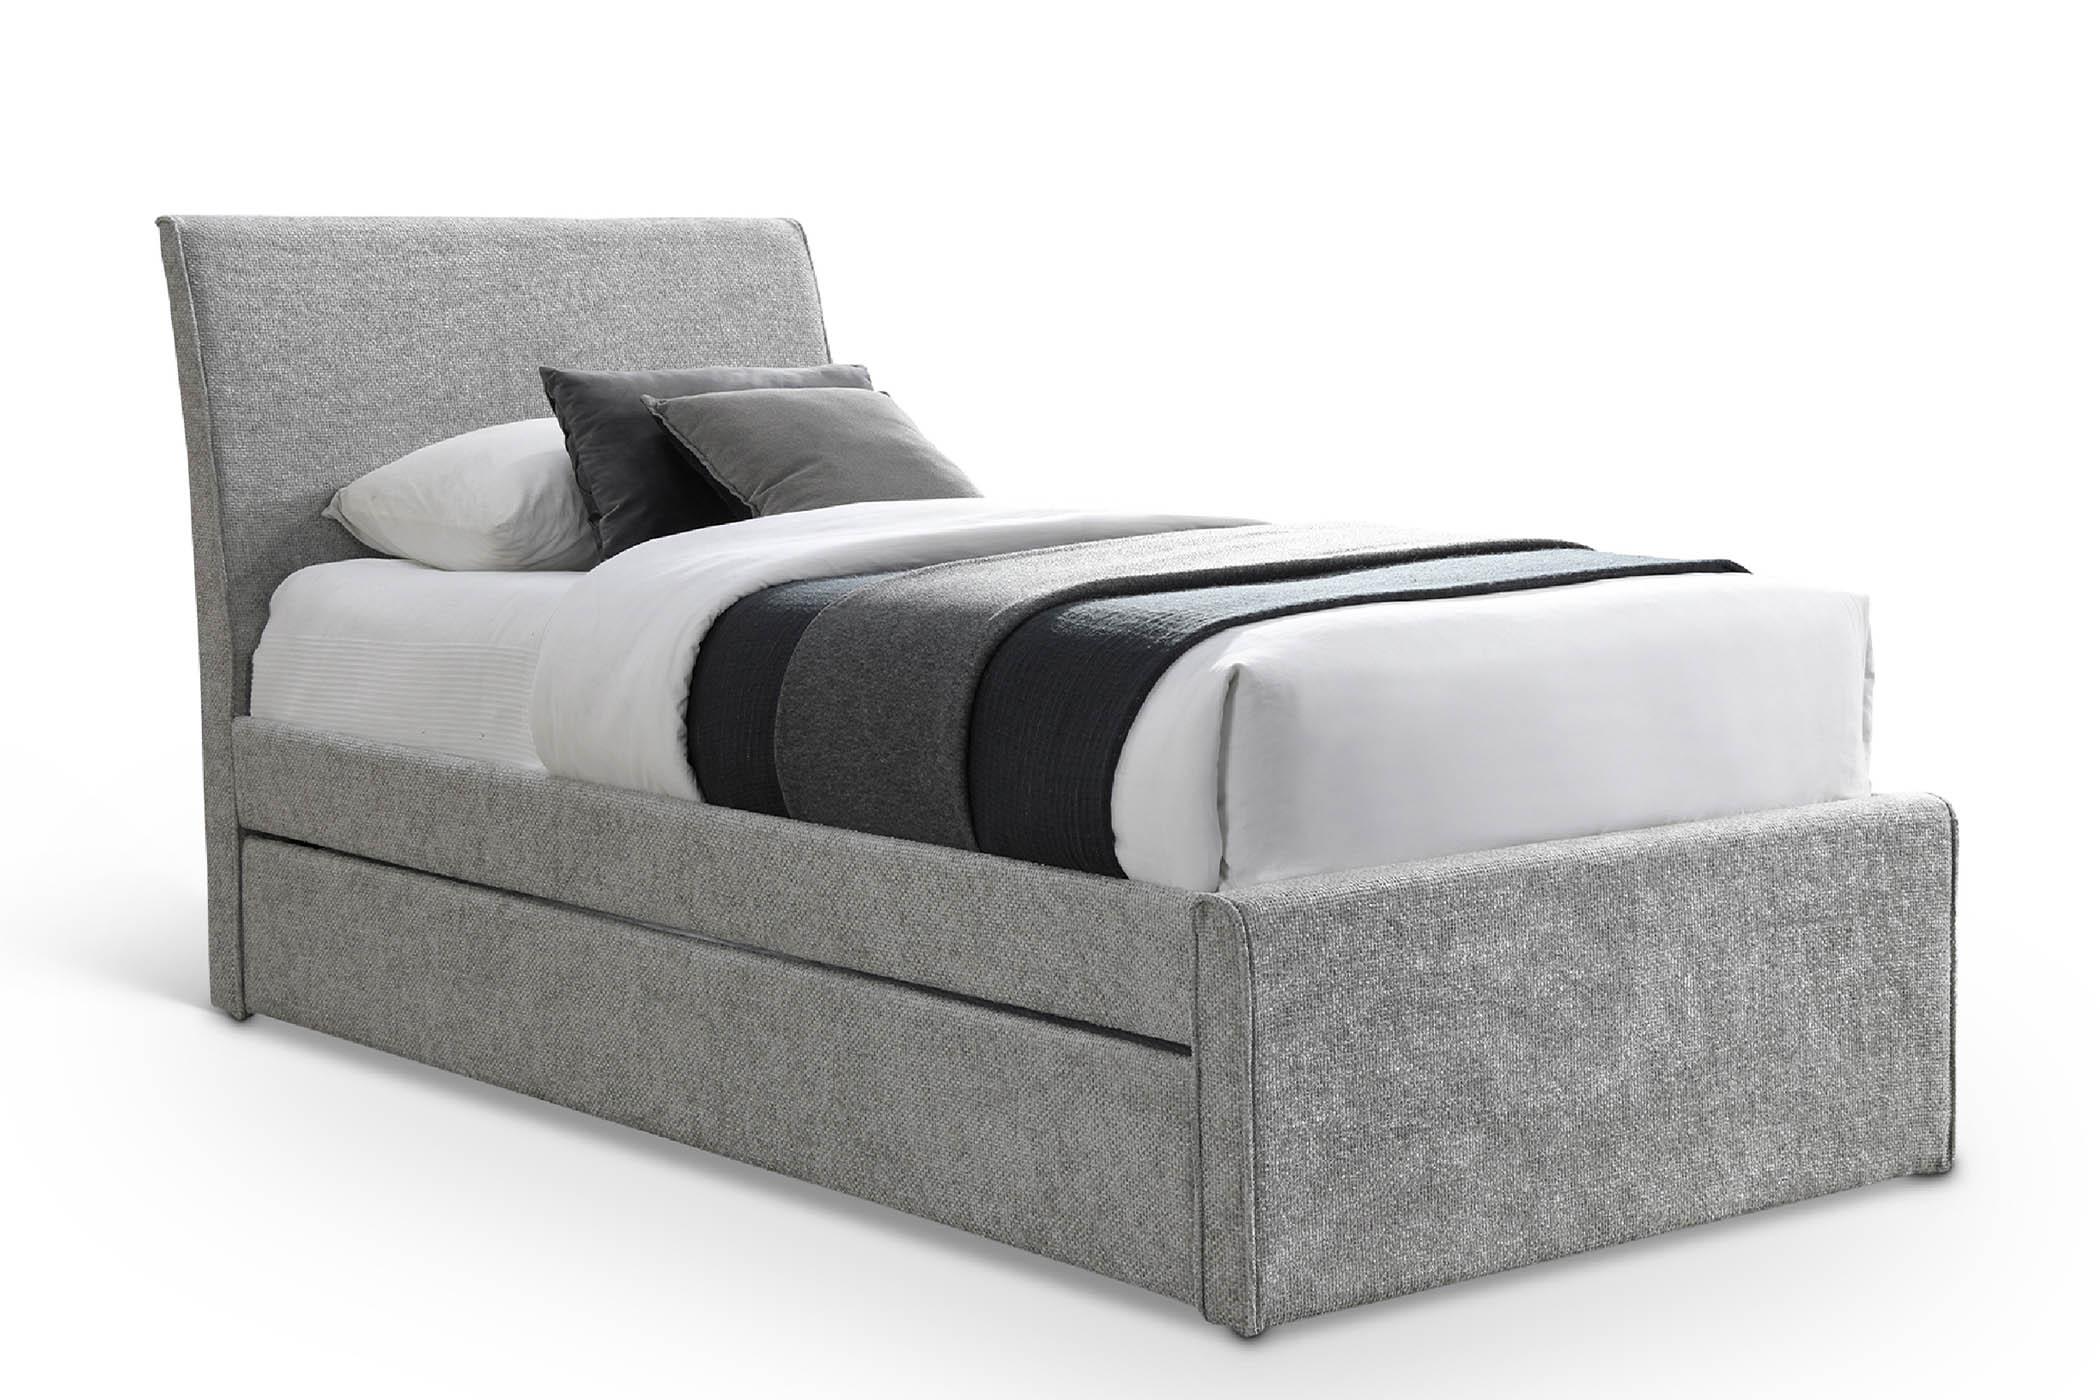 Meridian Furniture MYLES B1262Grey-T Daybed